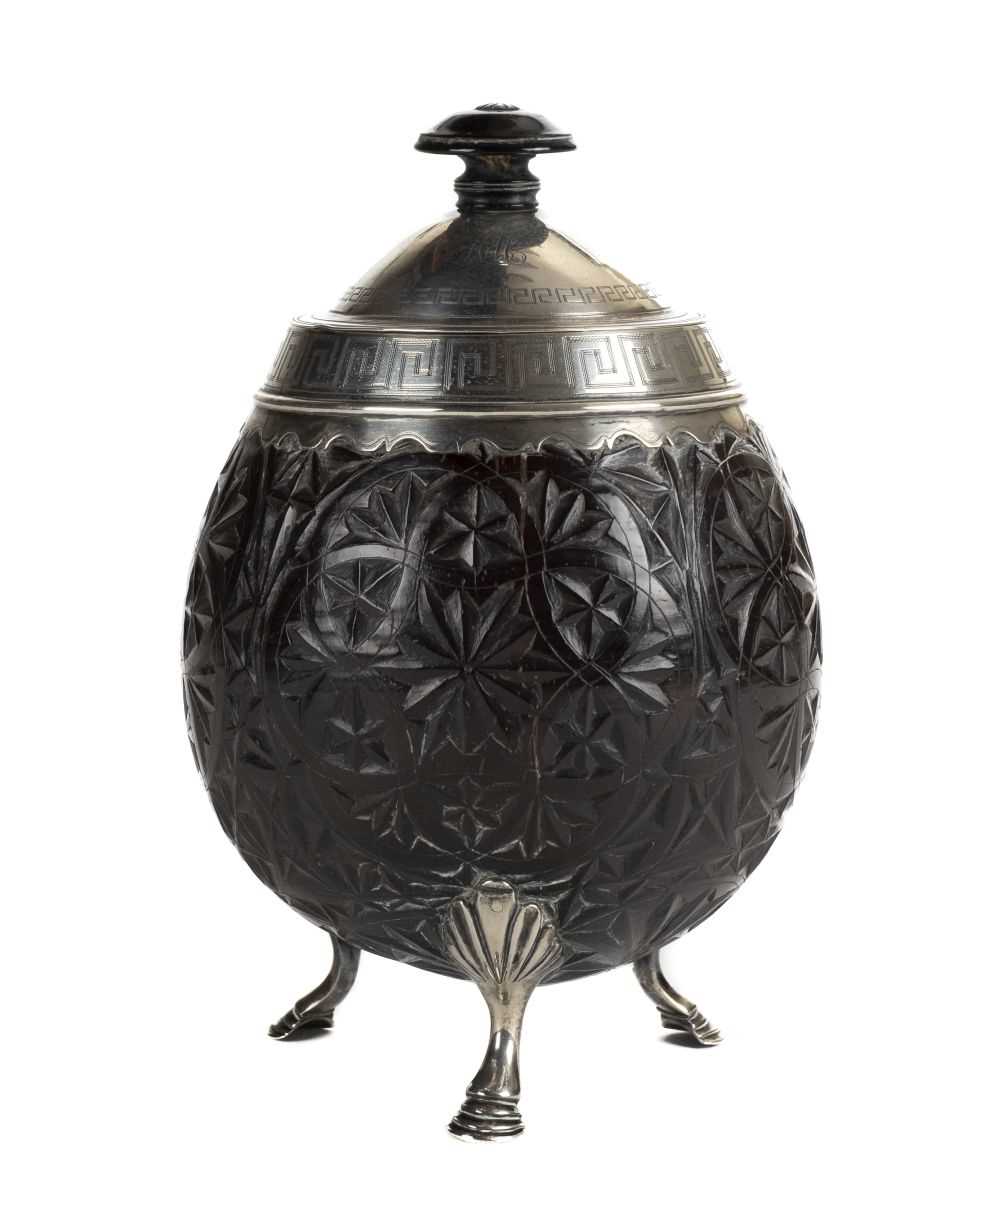 Lot 98 - Coconut cup. A George III silver-mounted coconut cup